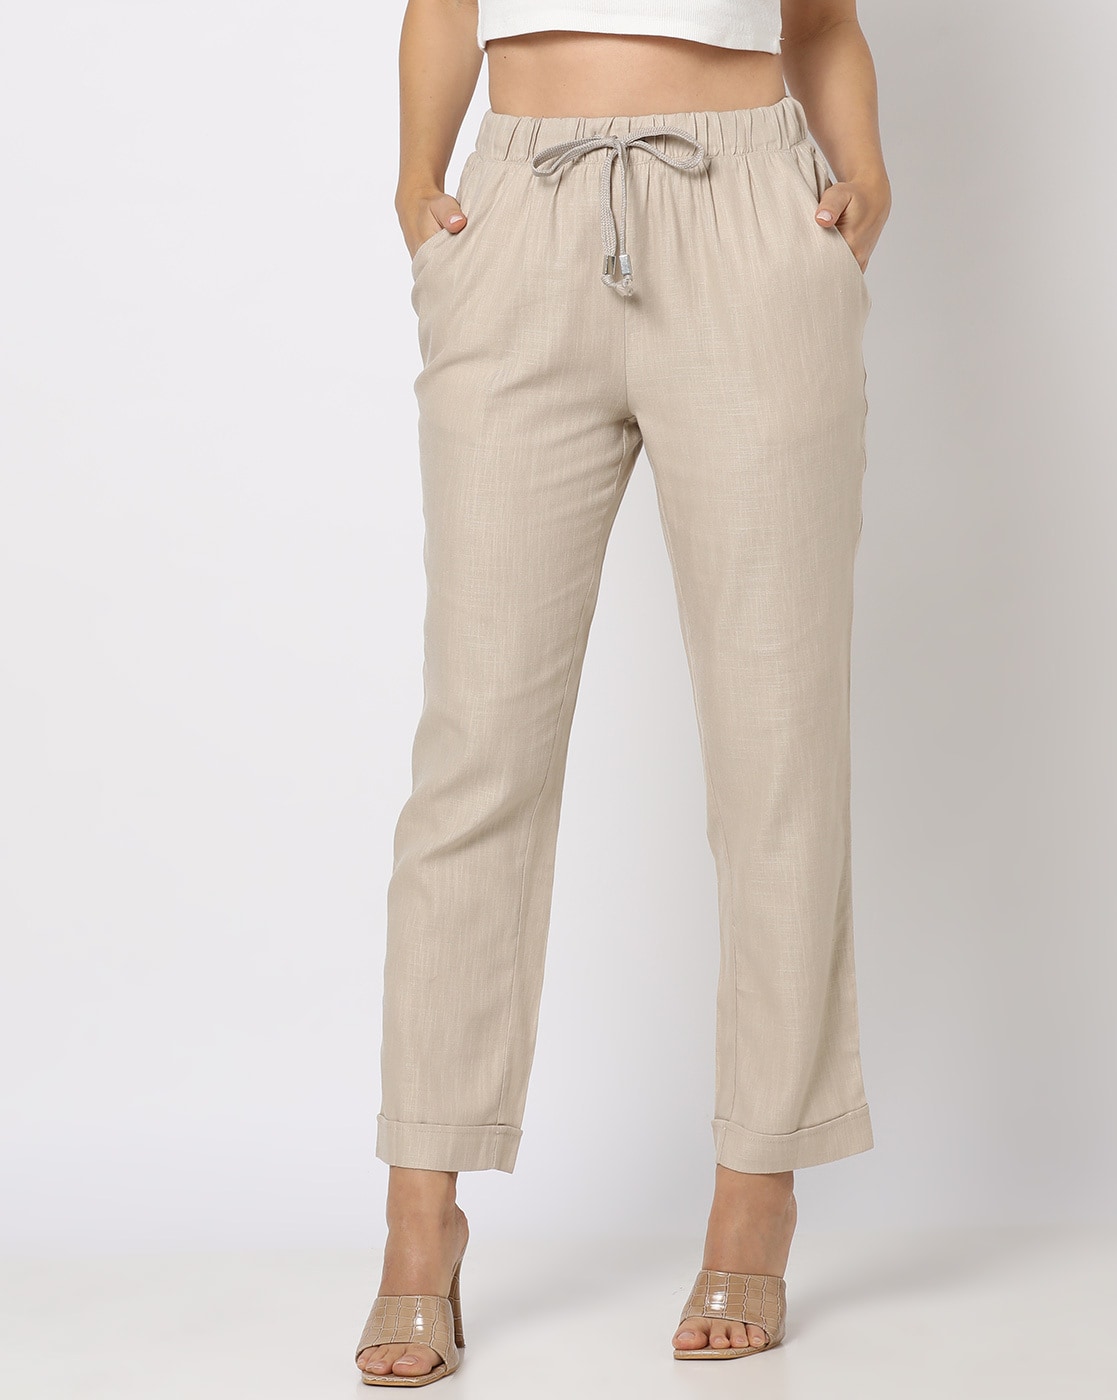 Buy Off White Trousers & Pants for Women by AND Online | Ajio.com